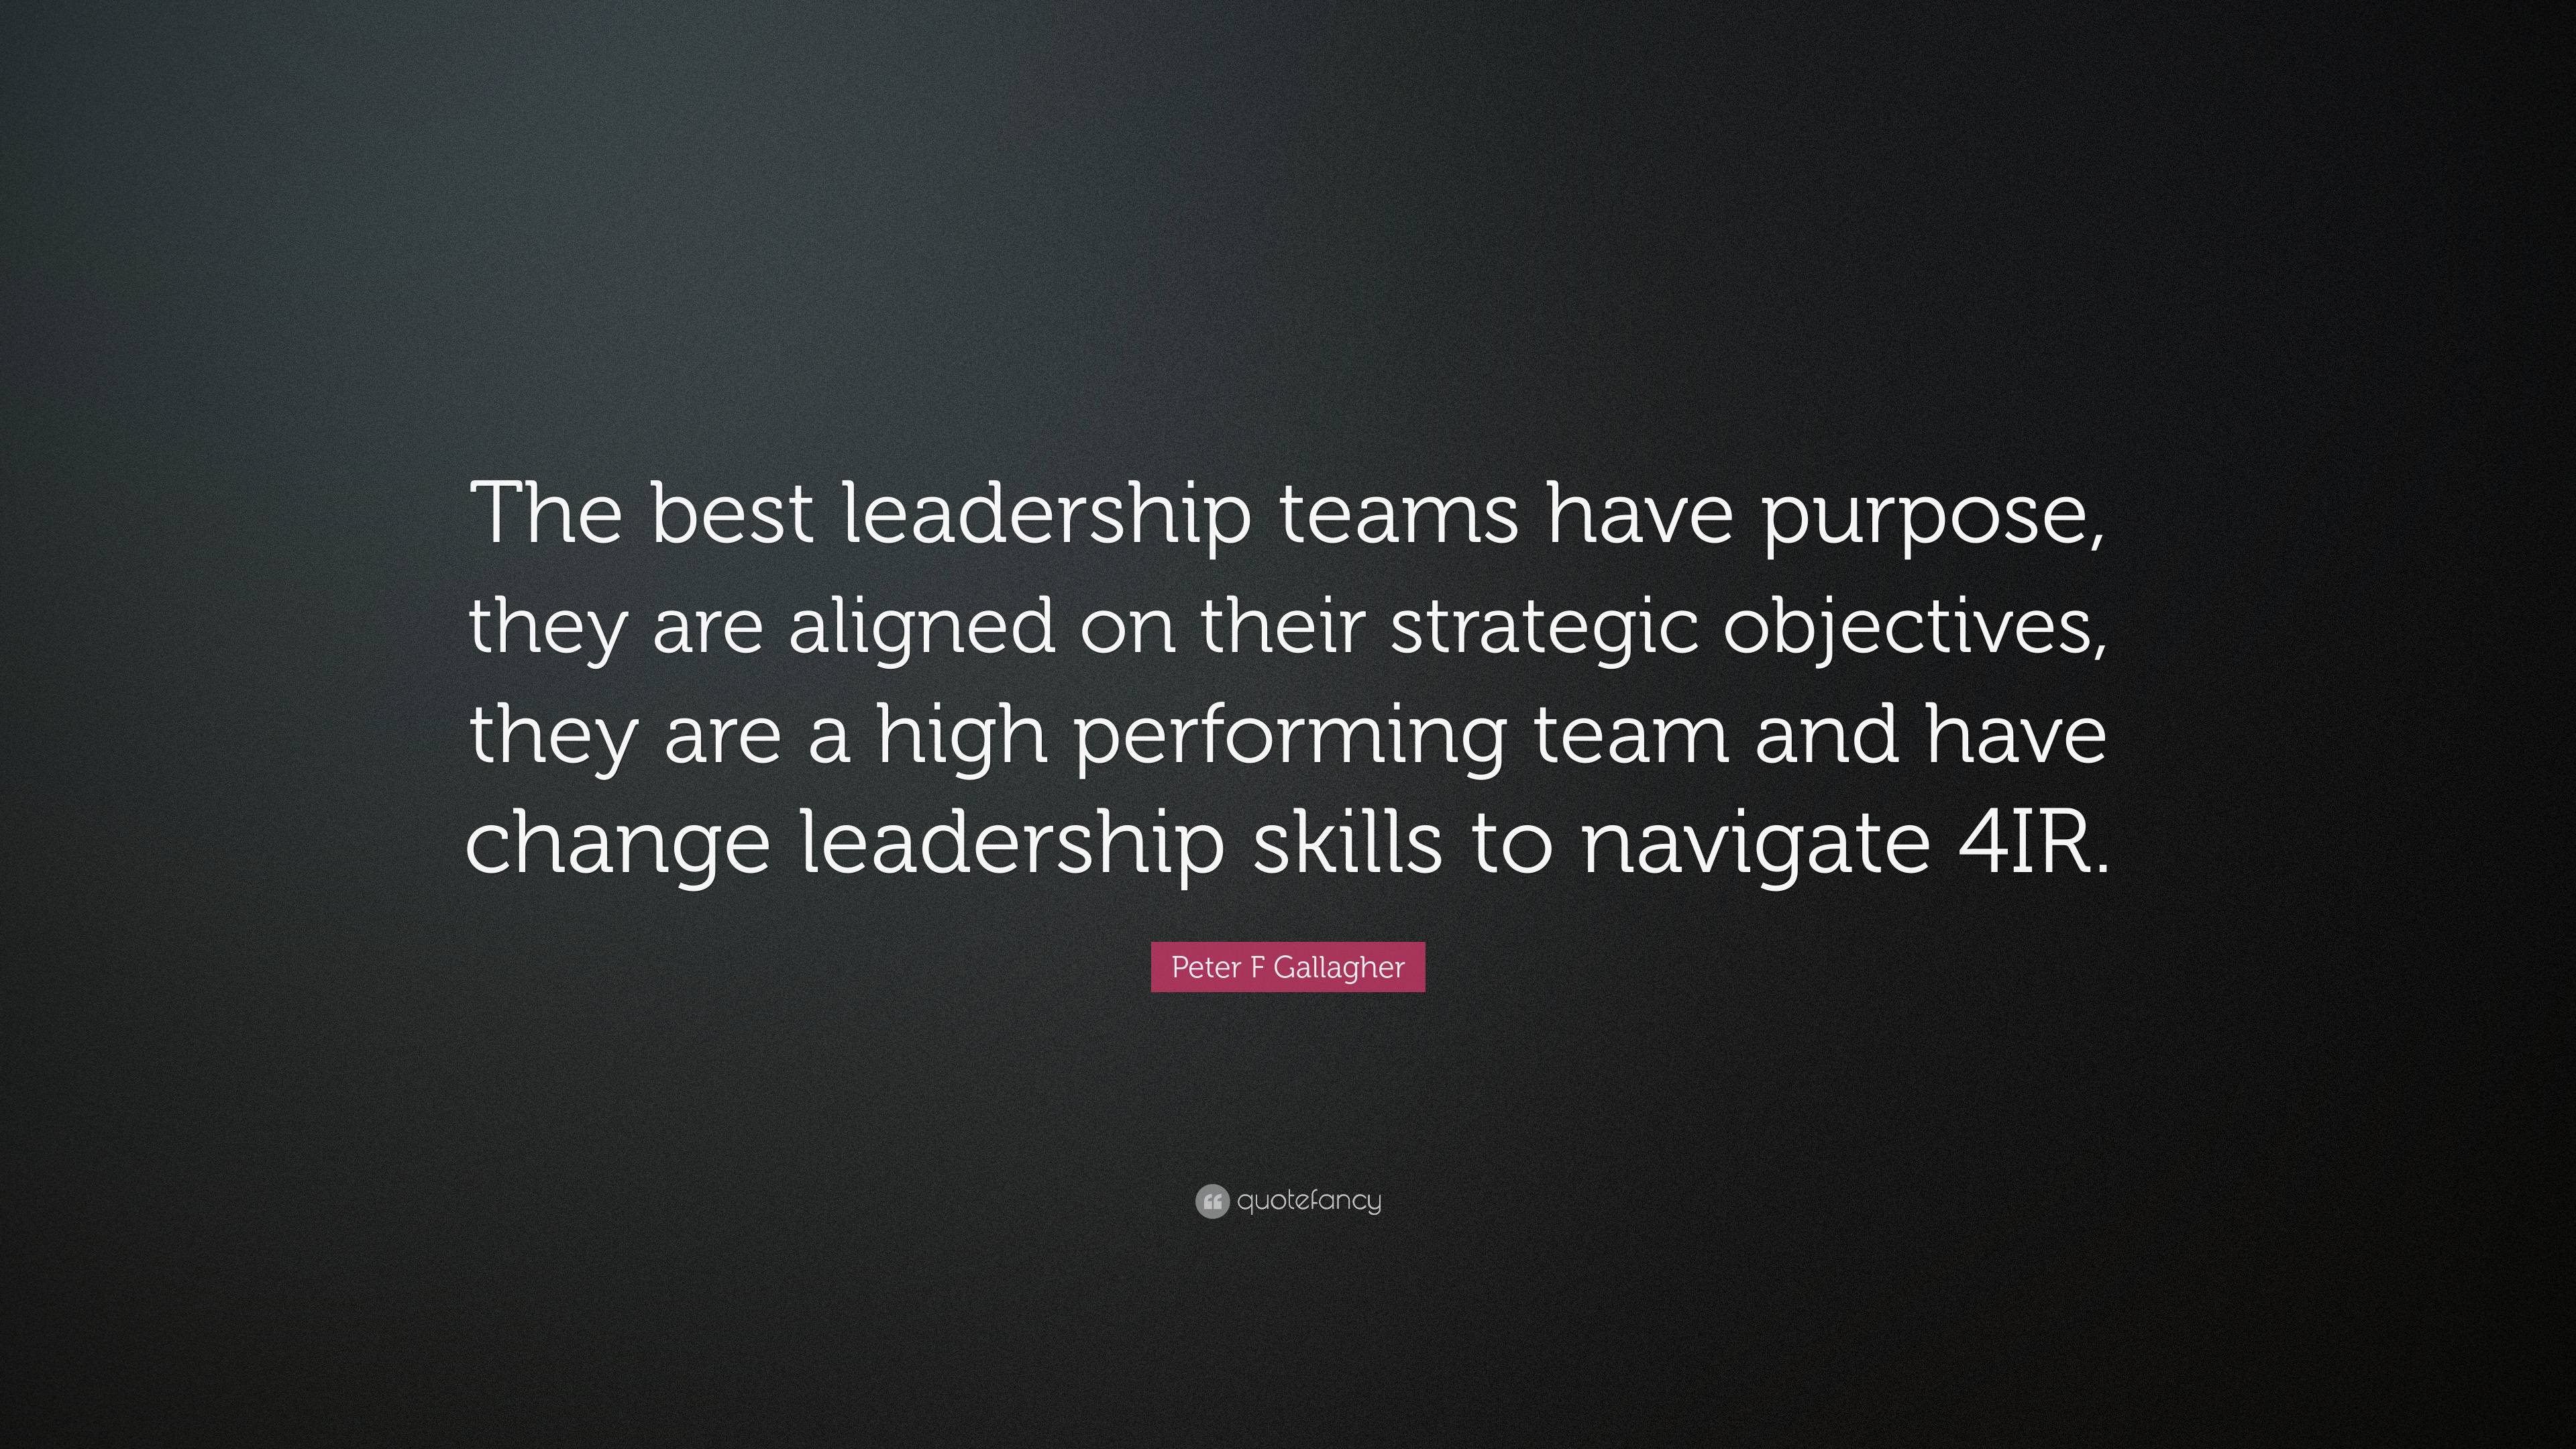 Peter F Gallagher Quote: “The best leadership teams have purpose, they ...